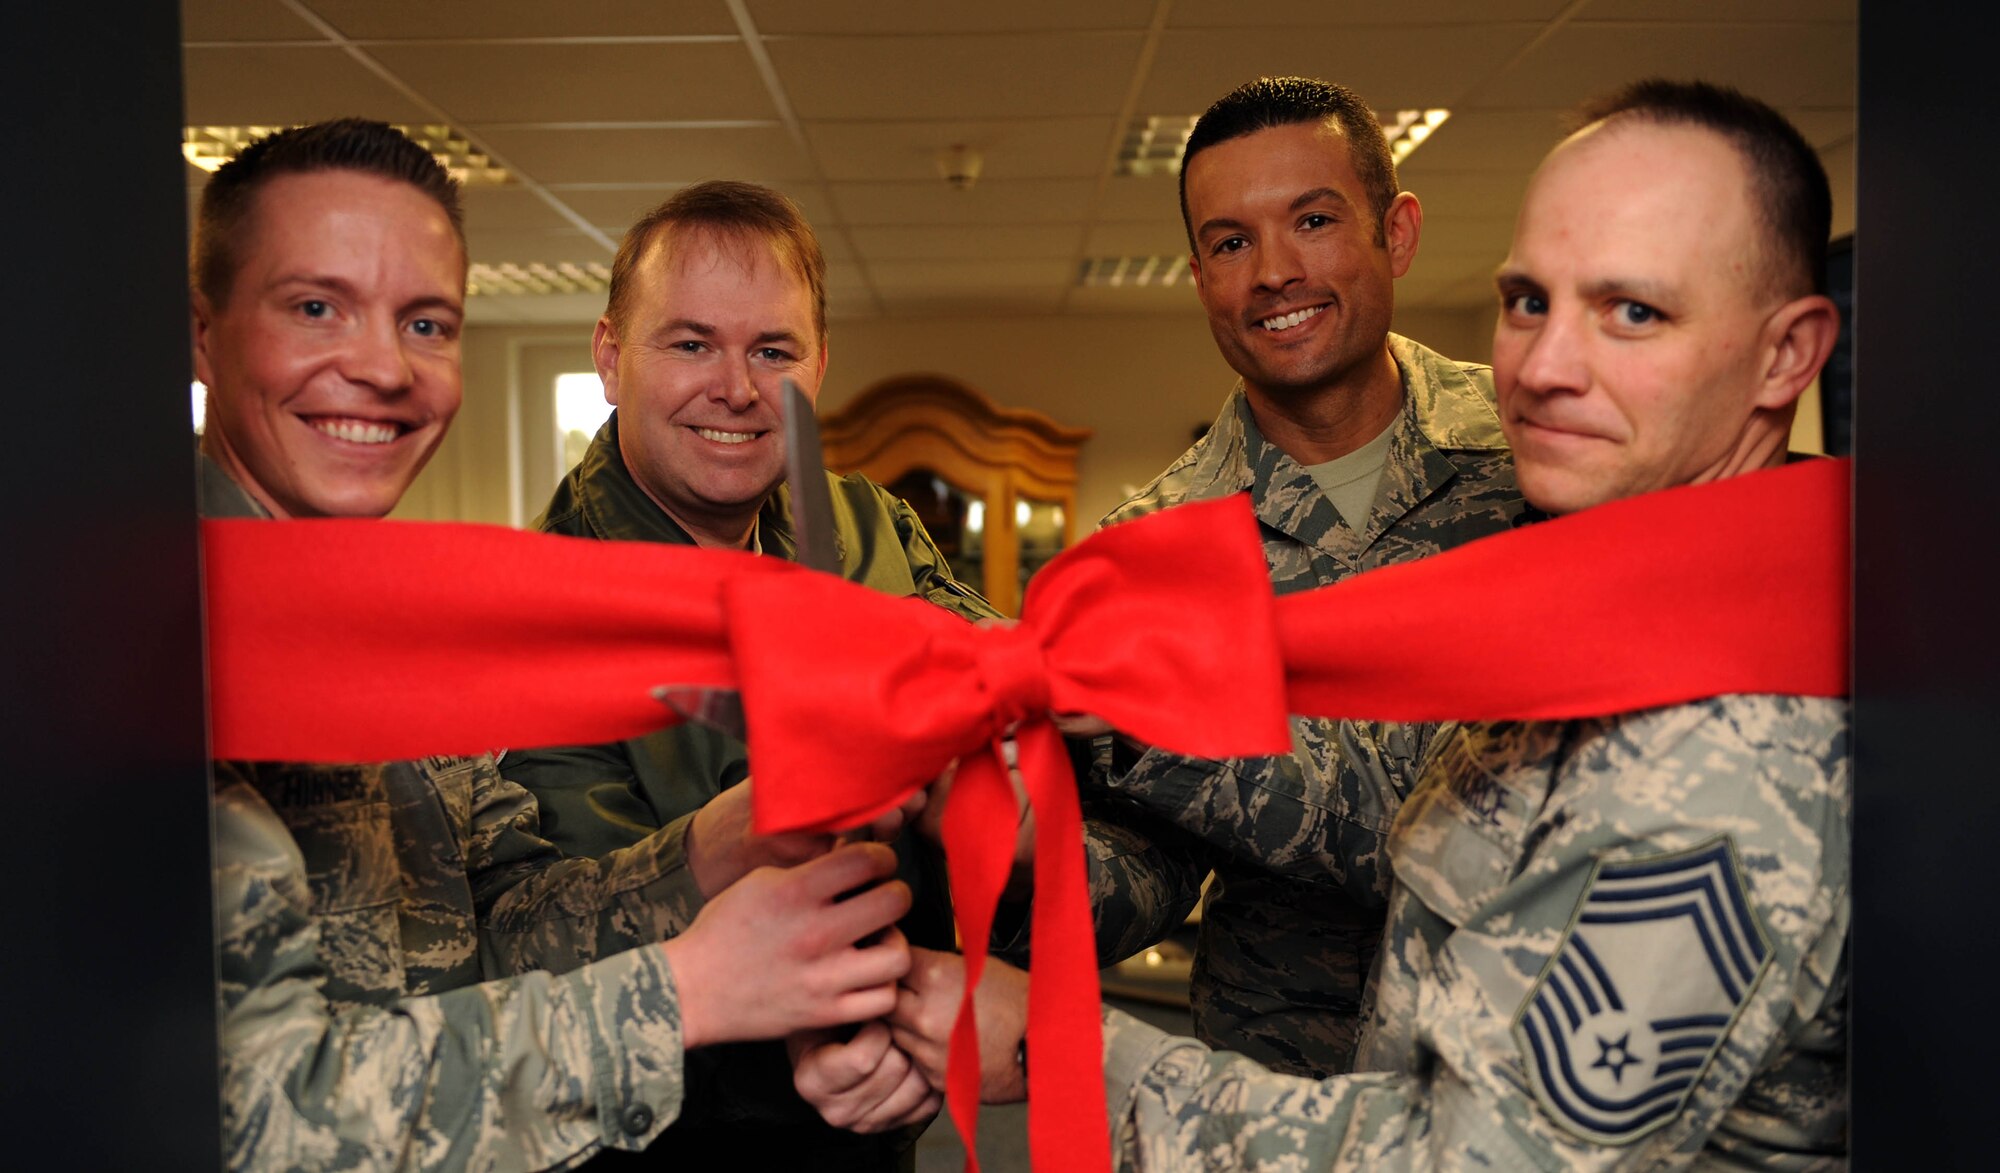 (From left to right) U.S. Air Force Tech. Sgt. Kalob Hinners, a Pitsenbarger Airman Leadership School instructor, U.S. Air Force Col. Lars Hubert, 52nd Fighter Wing vice commander, U.S. Air Force Master Sgt. Roberto Oregon, Pitsenbarger Airman Leadership School commandant, and U.S. Air Force Chief Master Sgt. Thomas Cooper, 52nd Mission Support Group superintendent, pose for a ceremonial ribbon-cutting during the Pitsenbarger Heritage Room ribbon-cutting ceremony in the Pitsenbarger Airman Leadership School at Spangdahlem Air Base, Germany, March 4, 2015. Hinners designed the heritage room over a two-year period before its opening that day. (U.S. Air Force photo by Airman 1st Class Timothy Kim/Released)